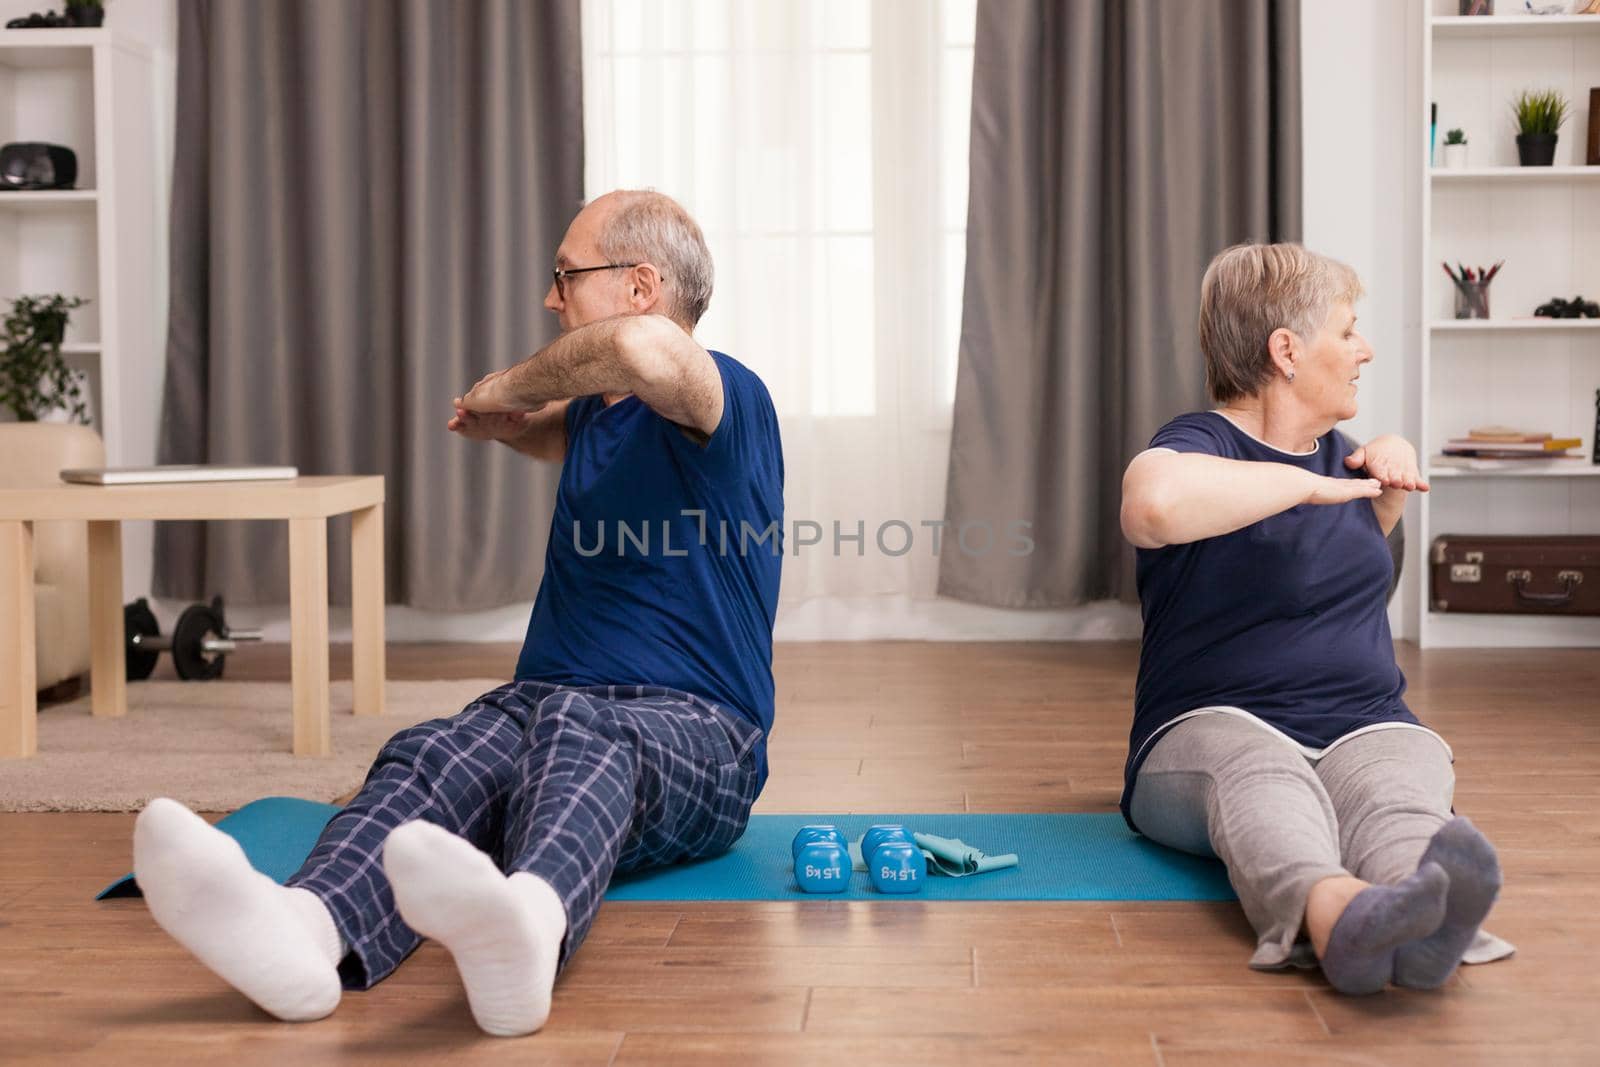 Exercises for elderly health at home on yoga mat. Old person healthy lifestyle exercise at home, workout and training, sport activity at home on yoga mat.